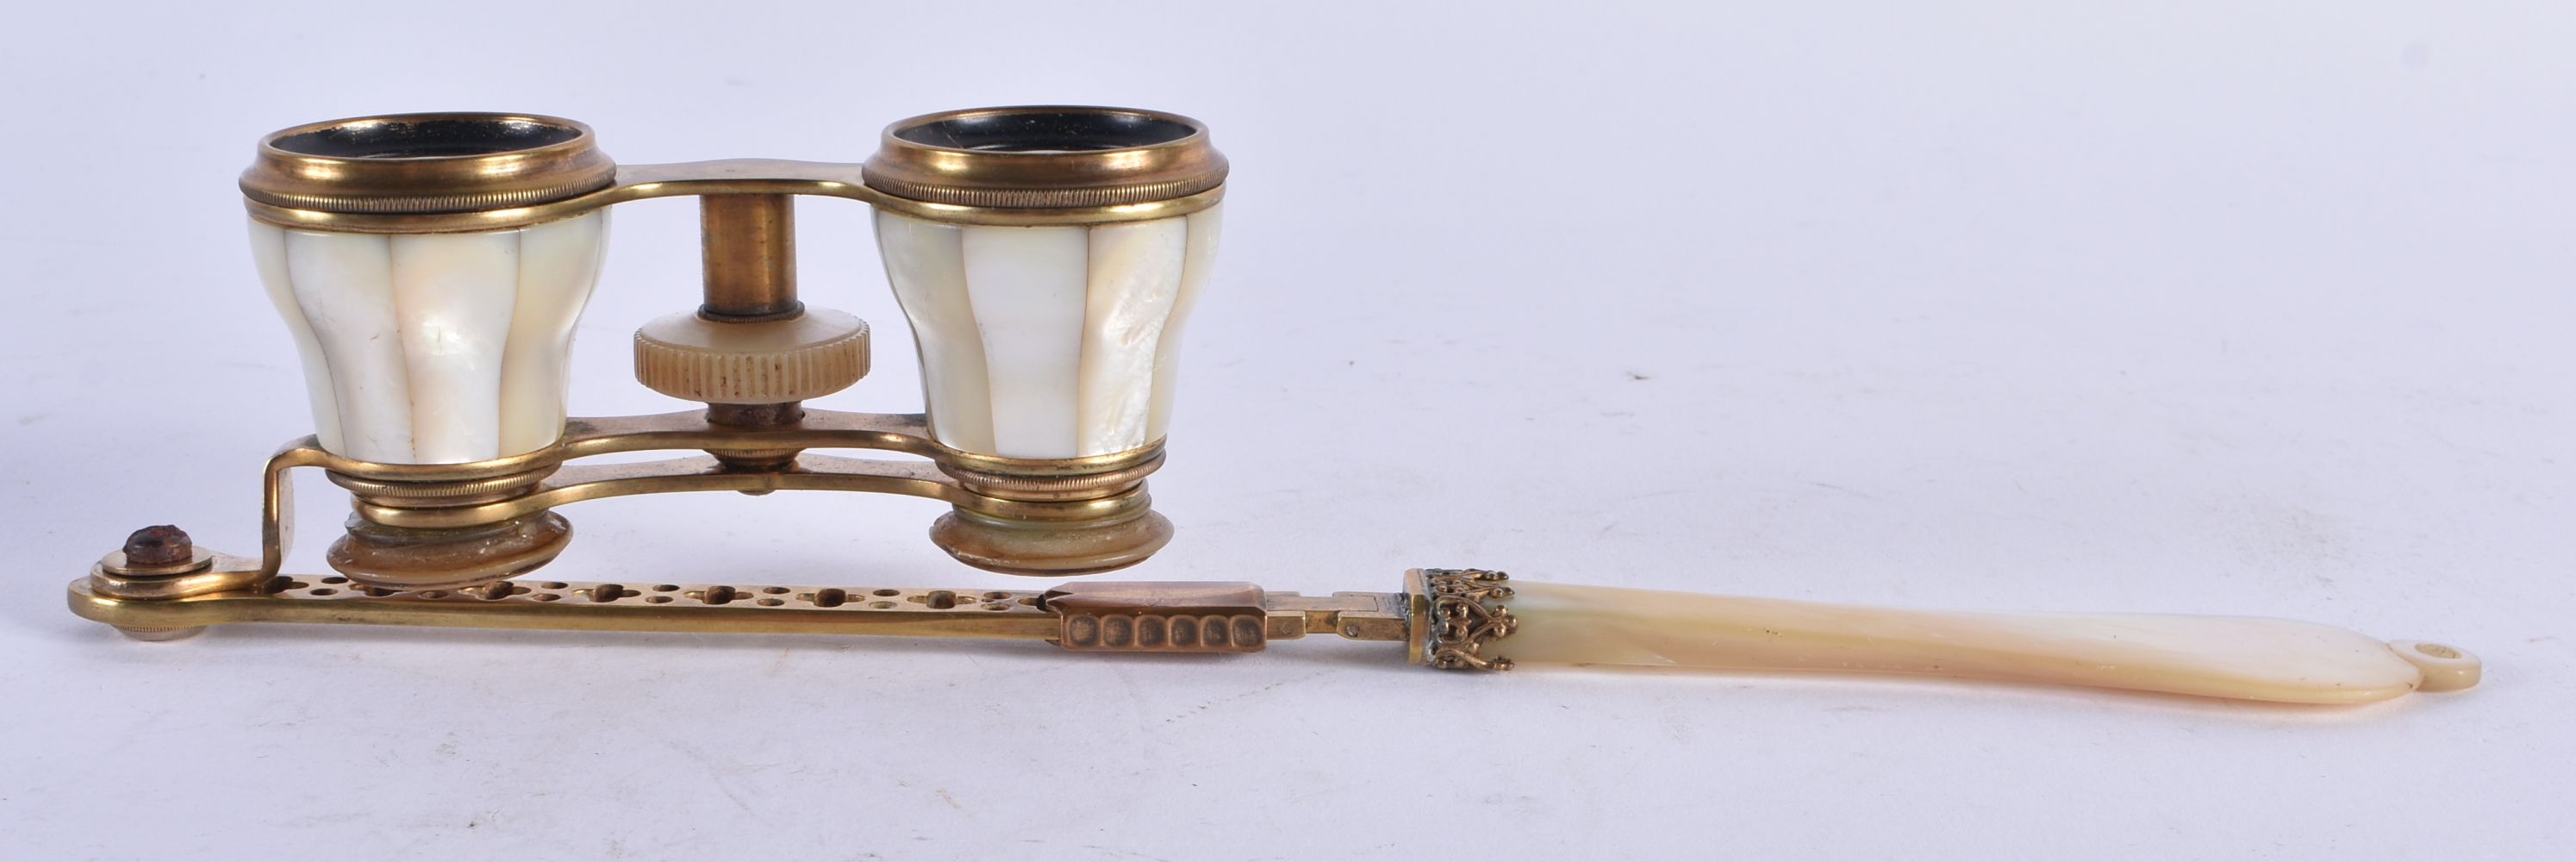 A PAIR OF MOTHER OF PEARL OPERA GLASSES. 21 cm x 8 cm. - Image 2 of 5